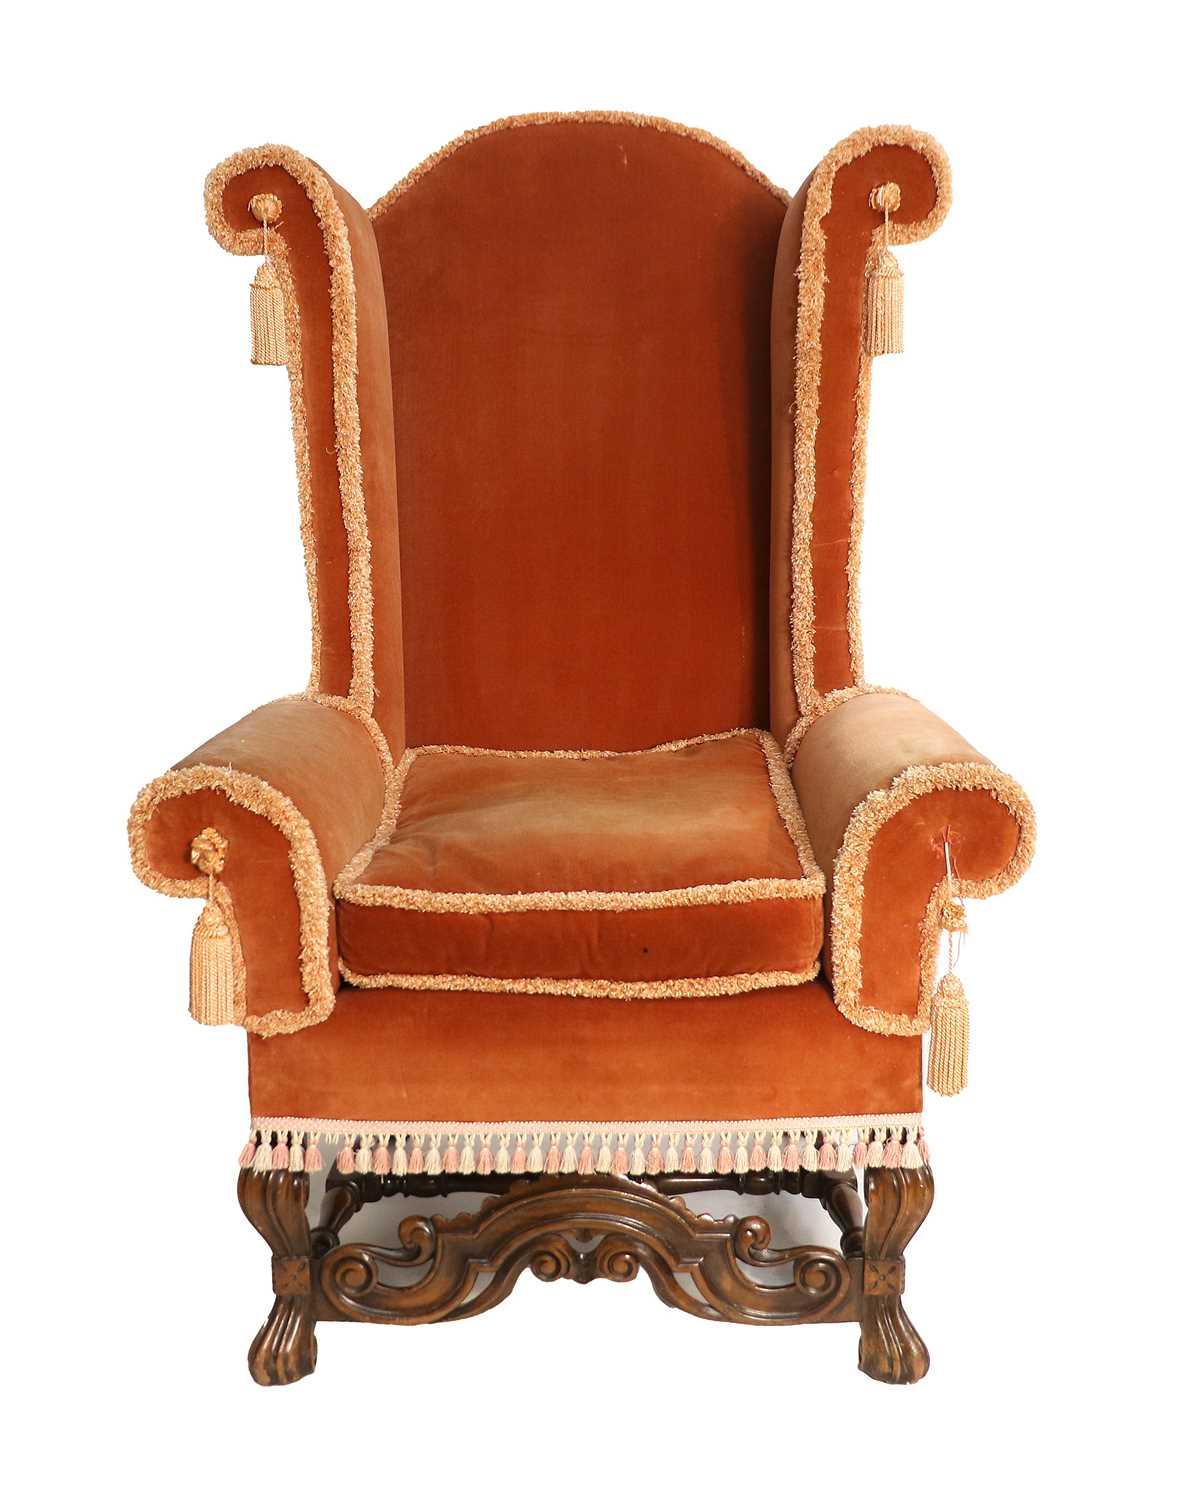 A William & Mary-Style Walnut-Framed Armchair, late 19th/early 20th century, recovered in pink - Image 2 of 10